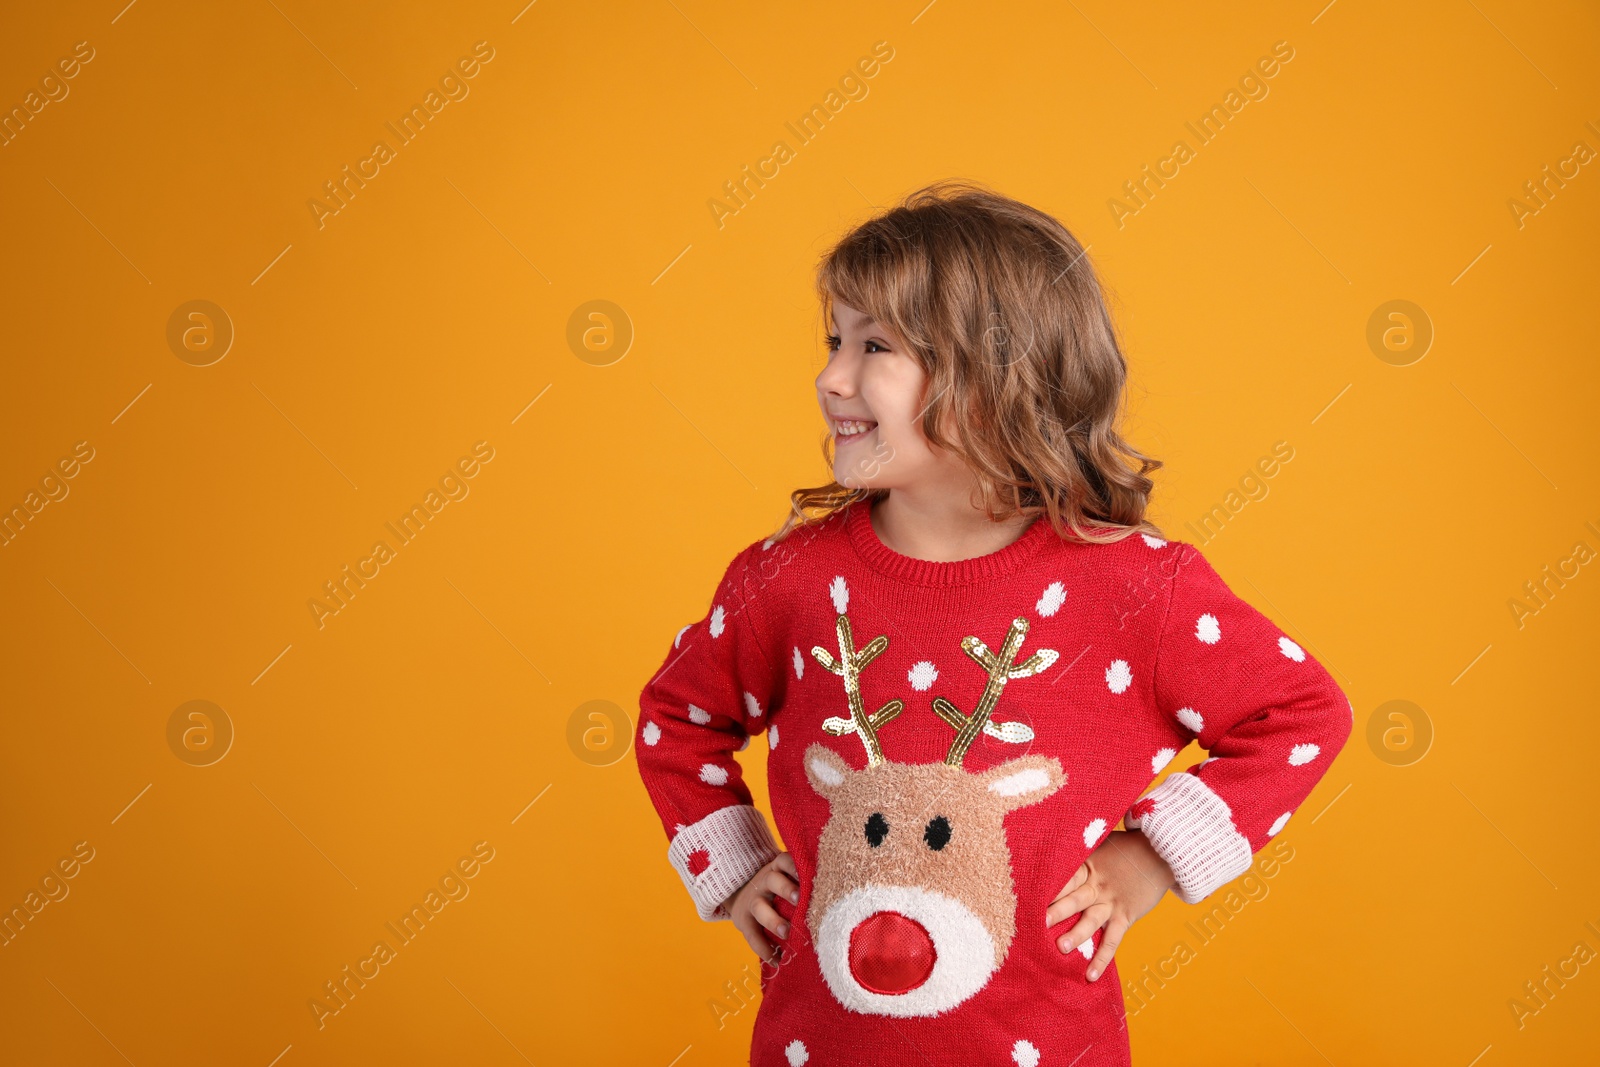 Photo of Cute little girl in red Christmas sweater smiling against orange background. Space for text